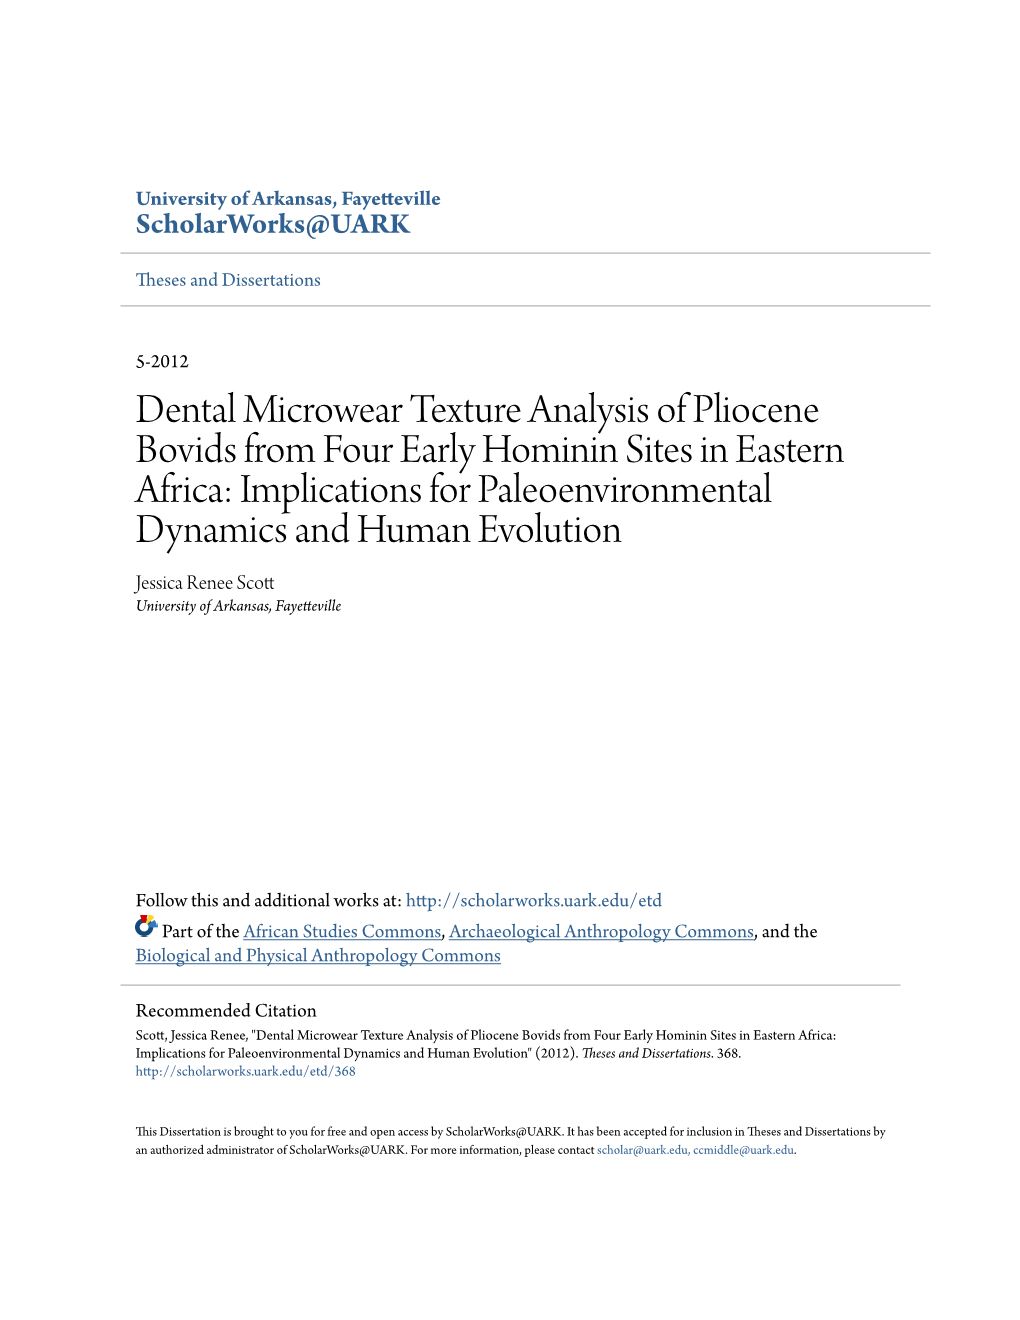 Dental Microwear Texture Analysis of Pliocene Bovids from Four Early Hominin Sites in Eastern Africa